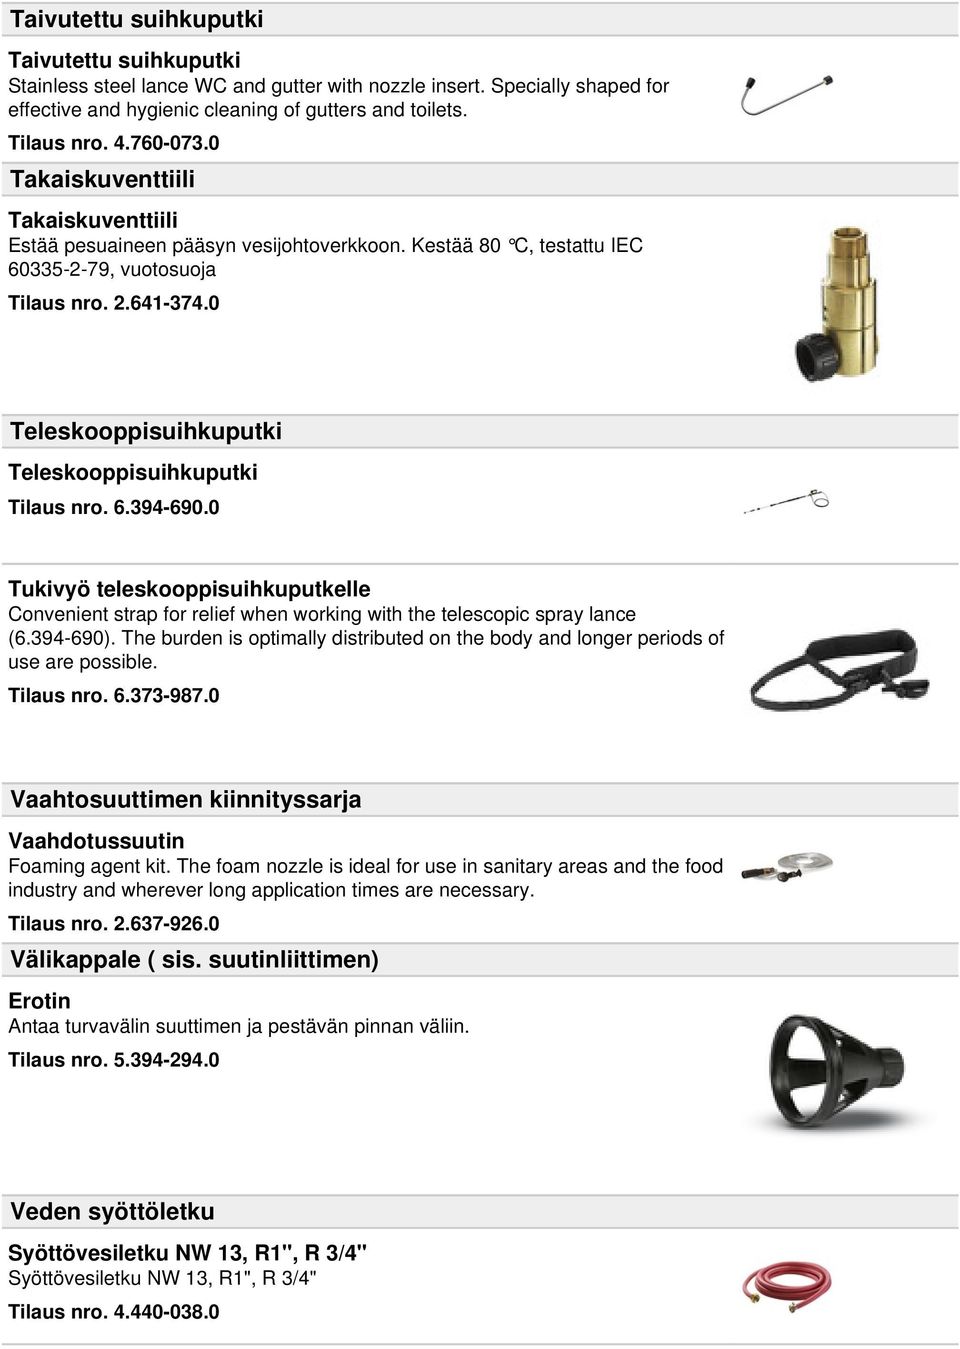 0 Teleskooppisuihkuputki Teleskooppisuihkuputki Tilaus nro. 6.394-690.0 Tukivyö teleskooppisuihkuputkelle Convenient strap for relief when working with the telescopic spray lance (6.394-690).